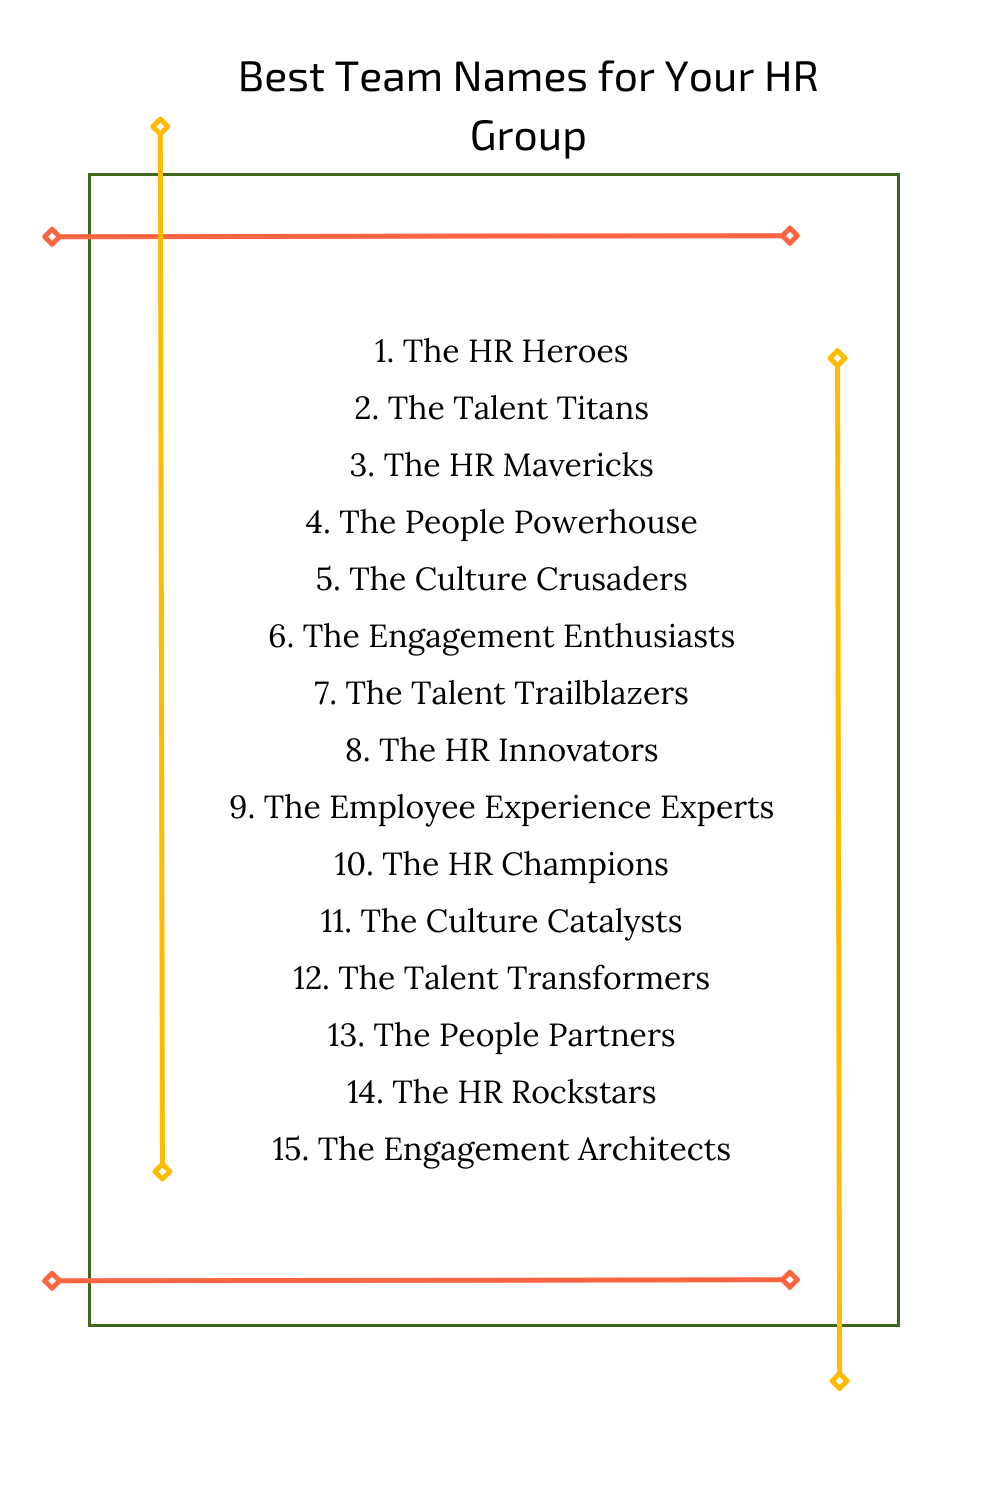 Best Team Names for Your HR Group